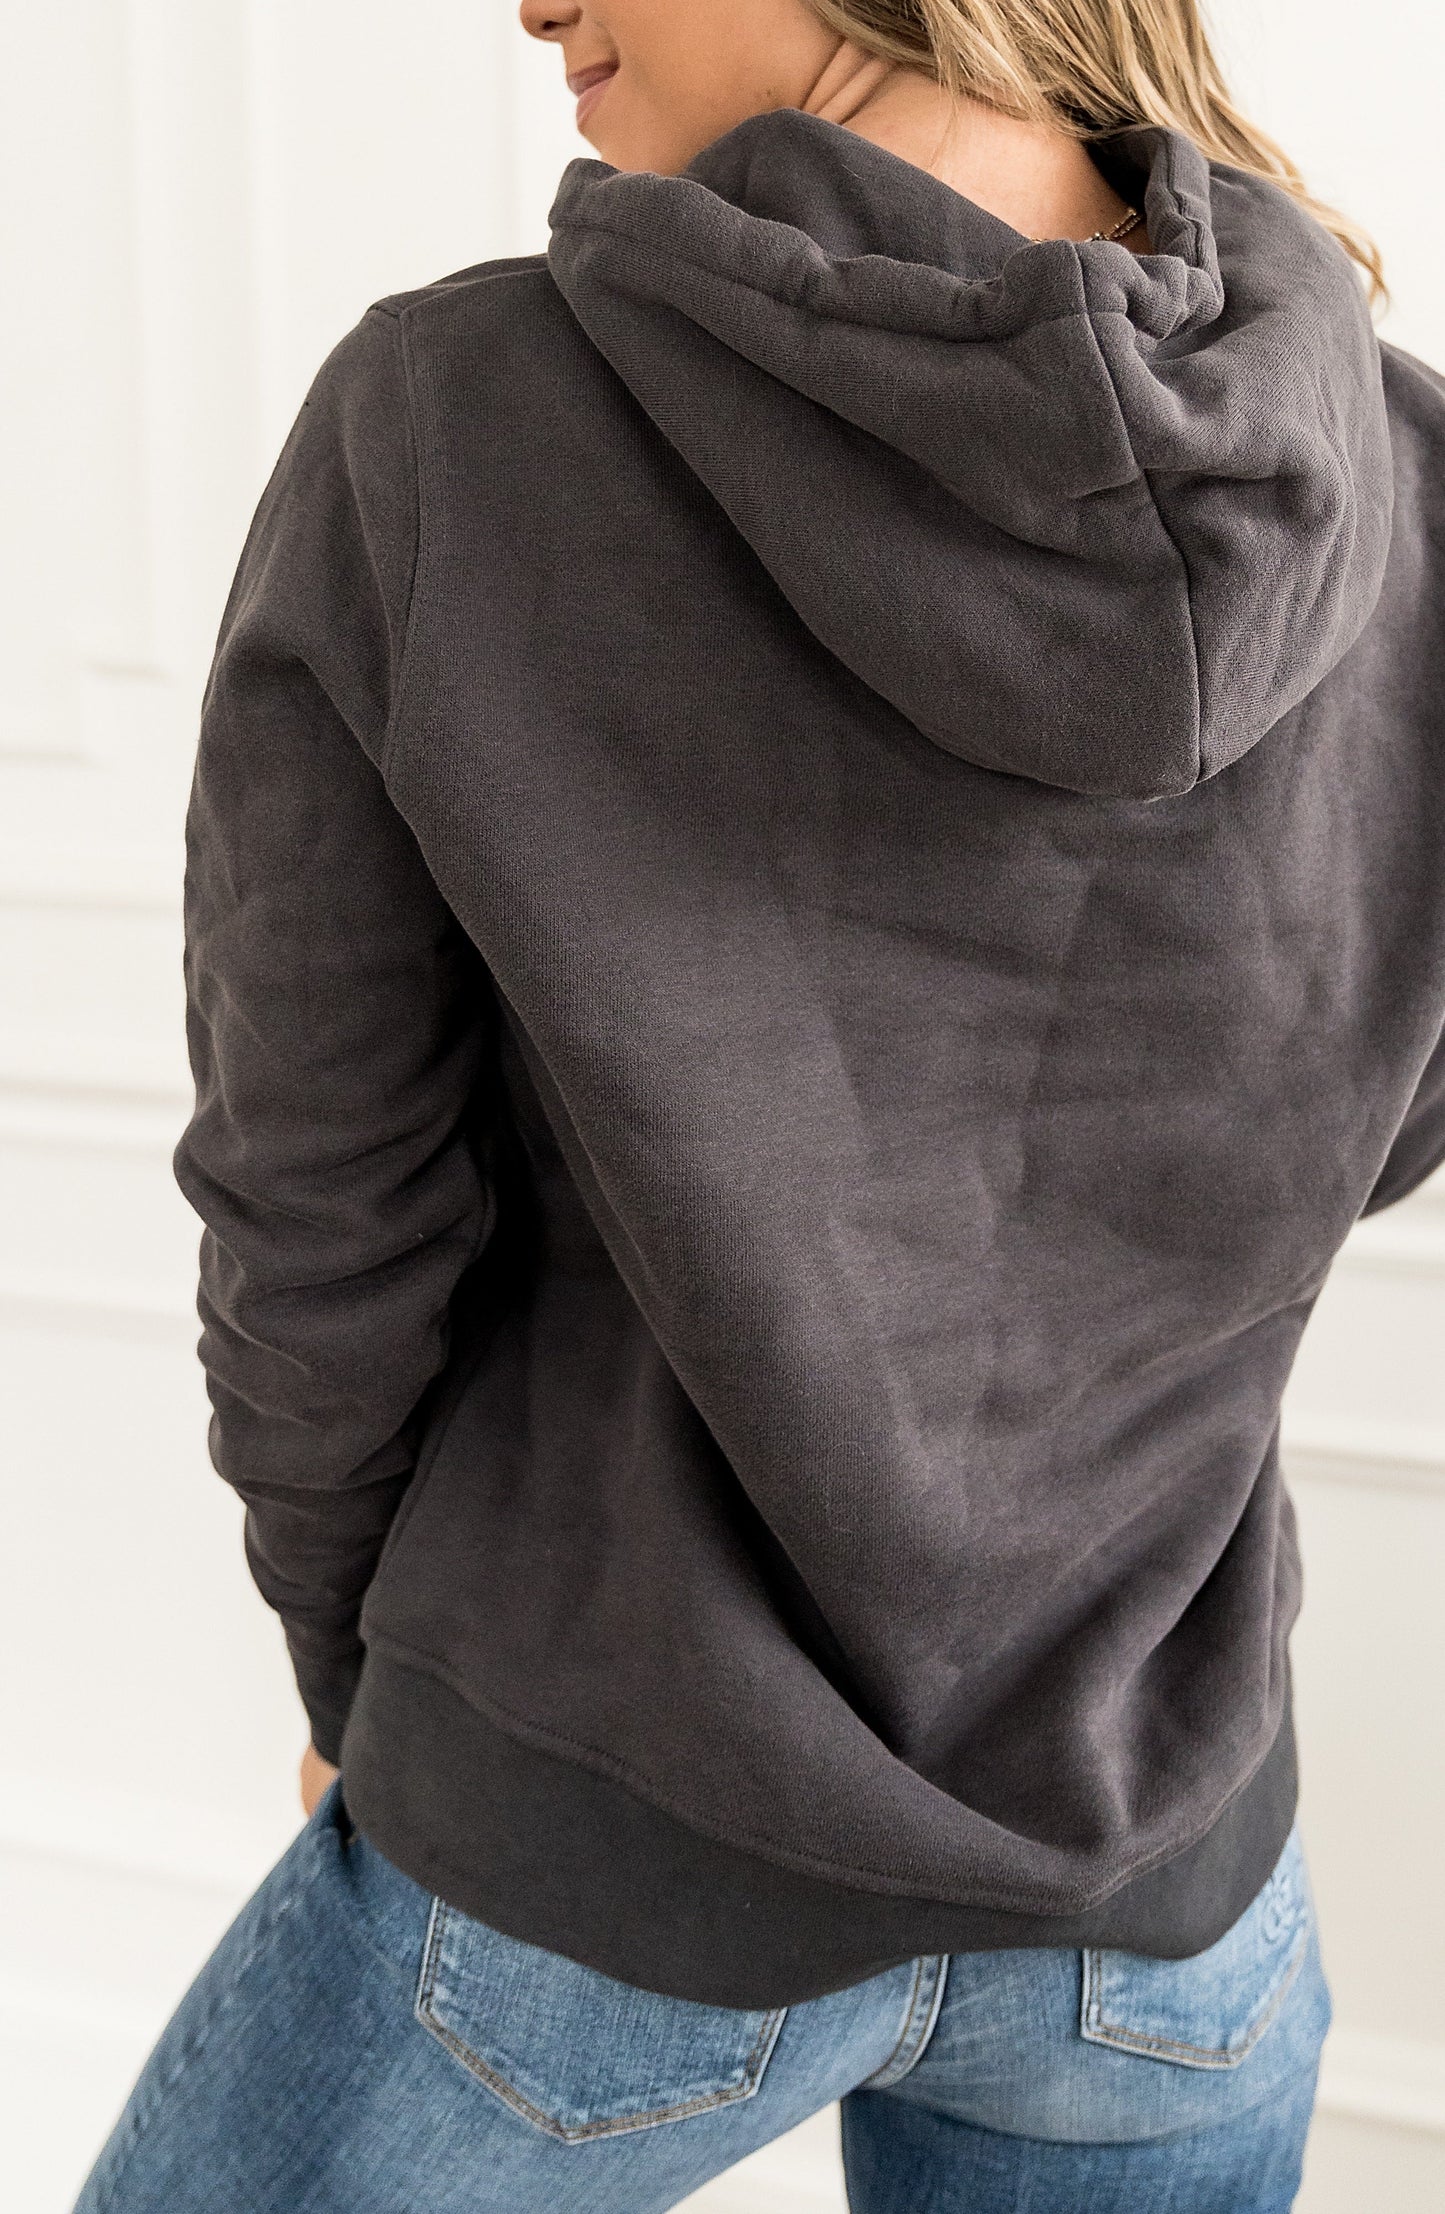 ONLINE ONLY! Staple Hoodie- Charcoal